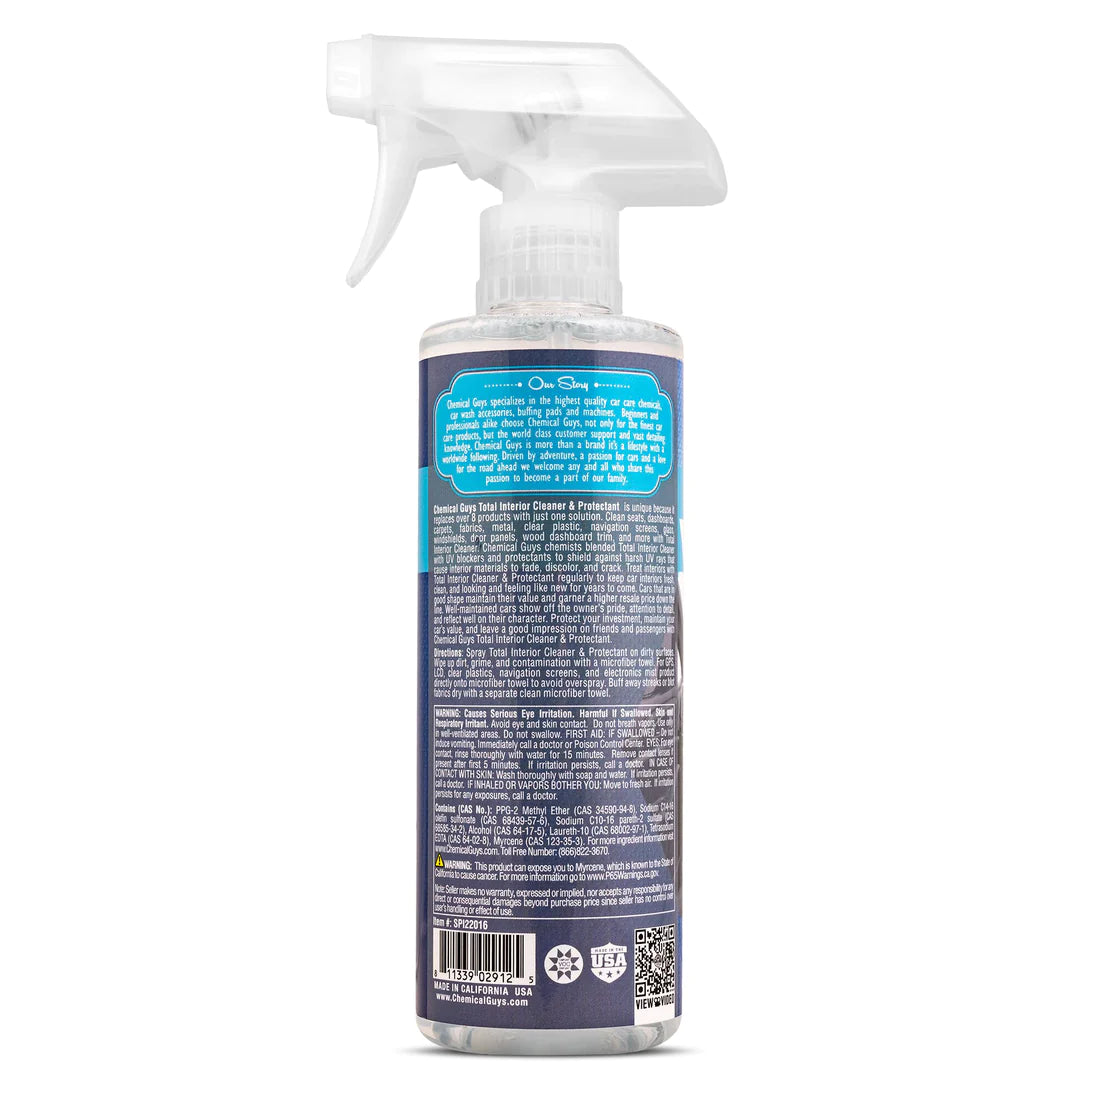 Chemical Guys Total Interior Cleaner & Protectant - 16oz